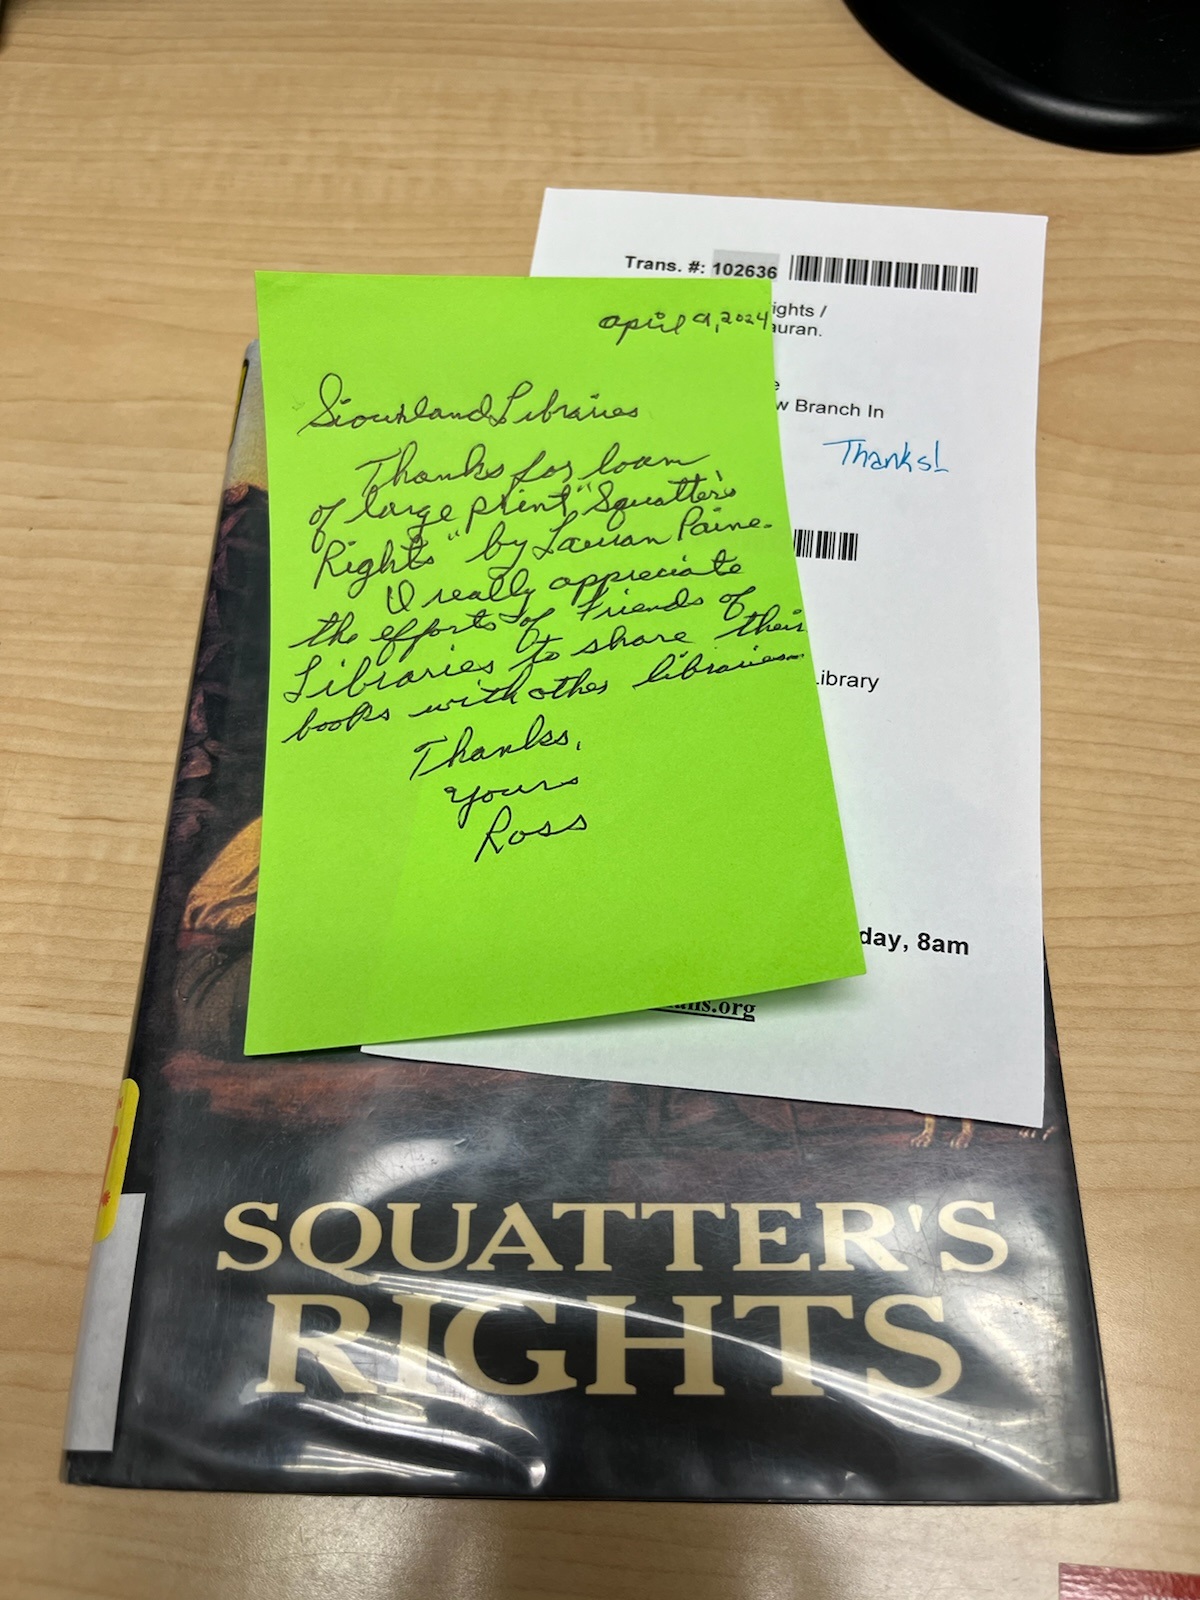 Handwritten thank-you note from an out-of-state library user